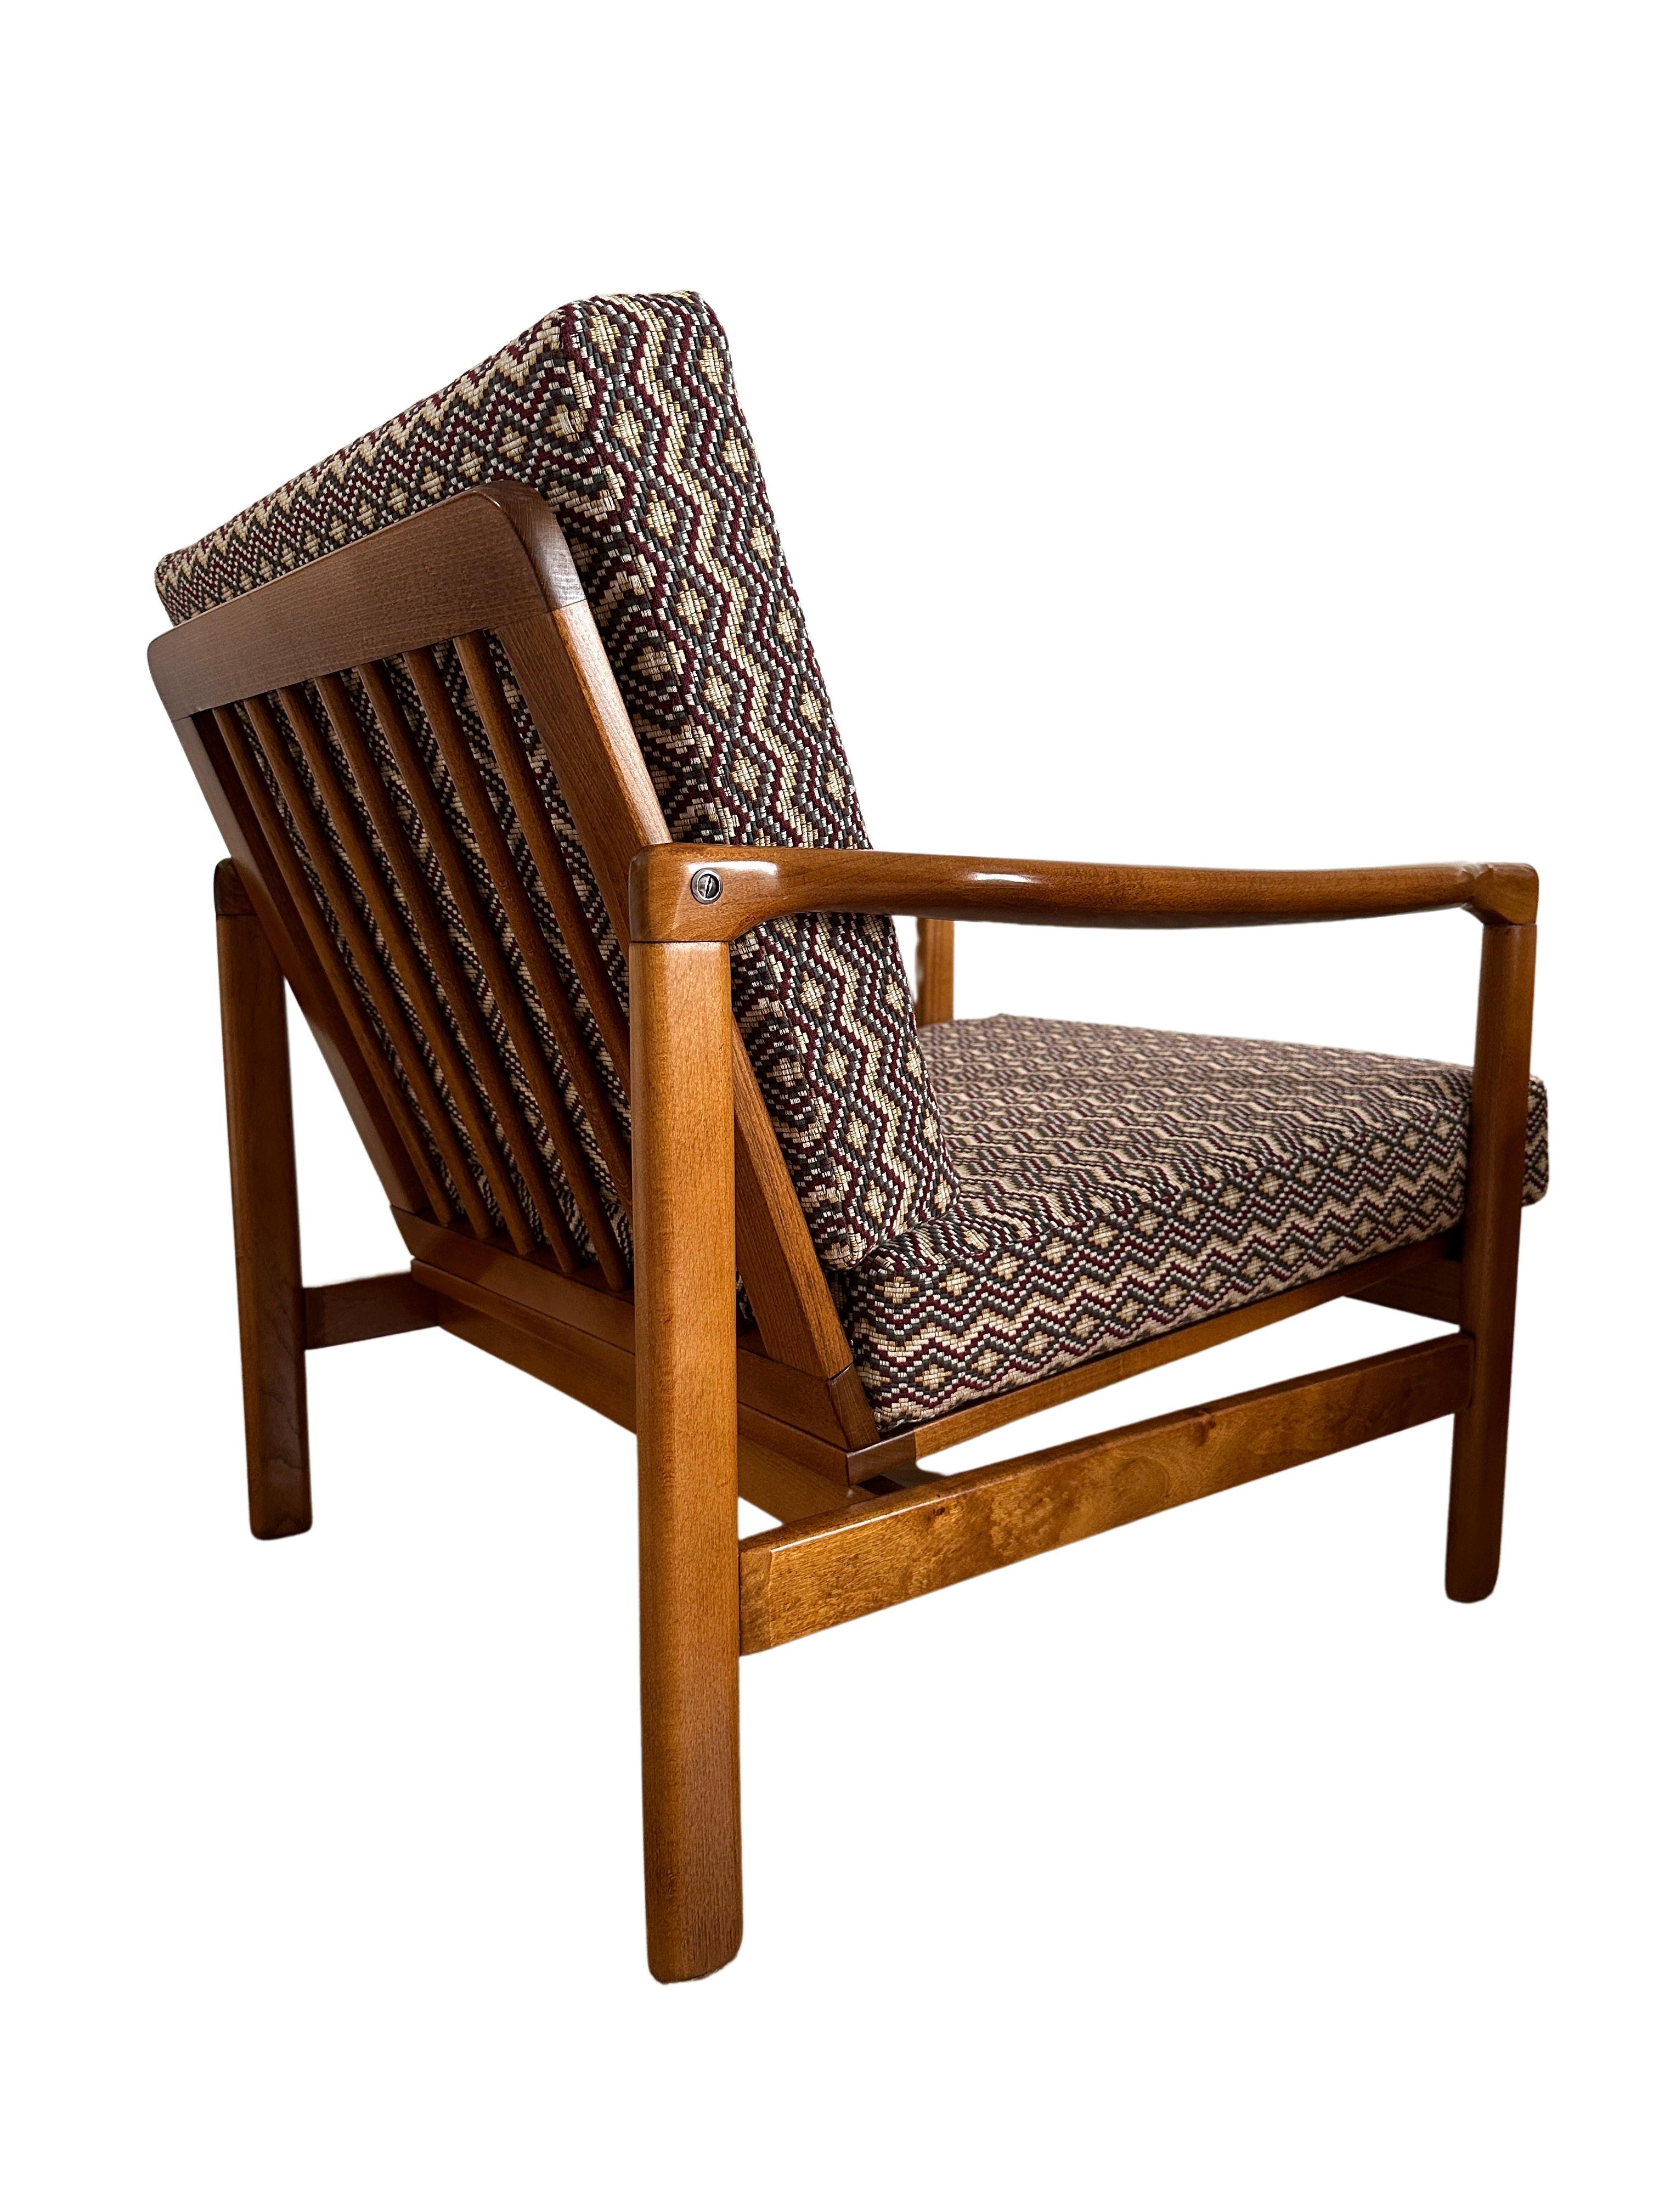 Midcentury Armchair, in Geometric and Ethnic Fabric, Europe, 1960s For Sale 2